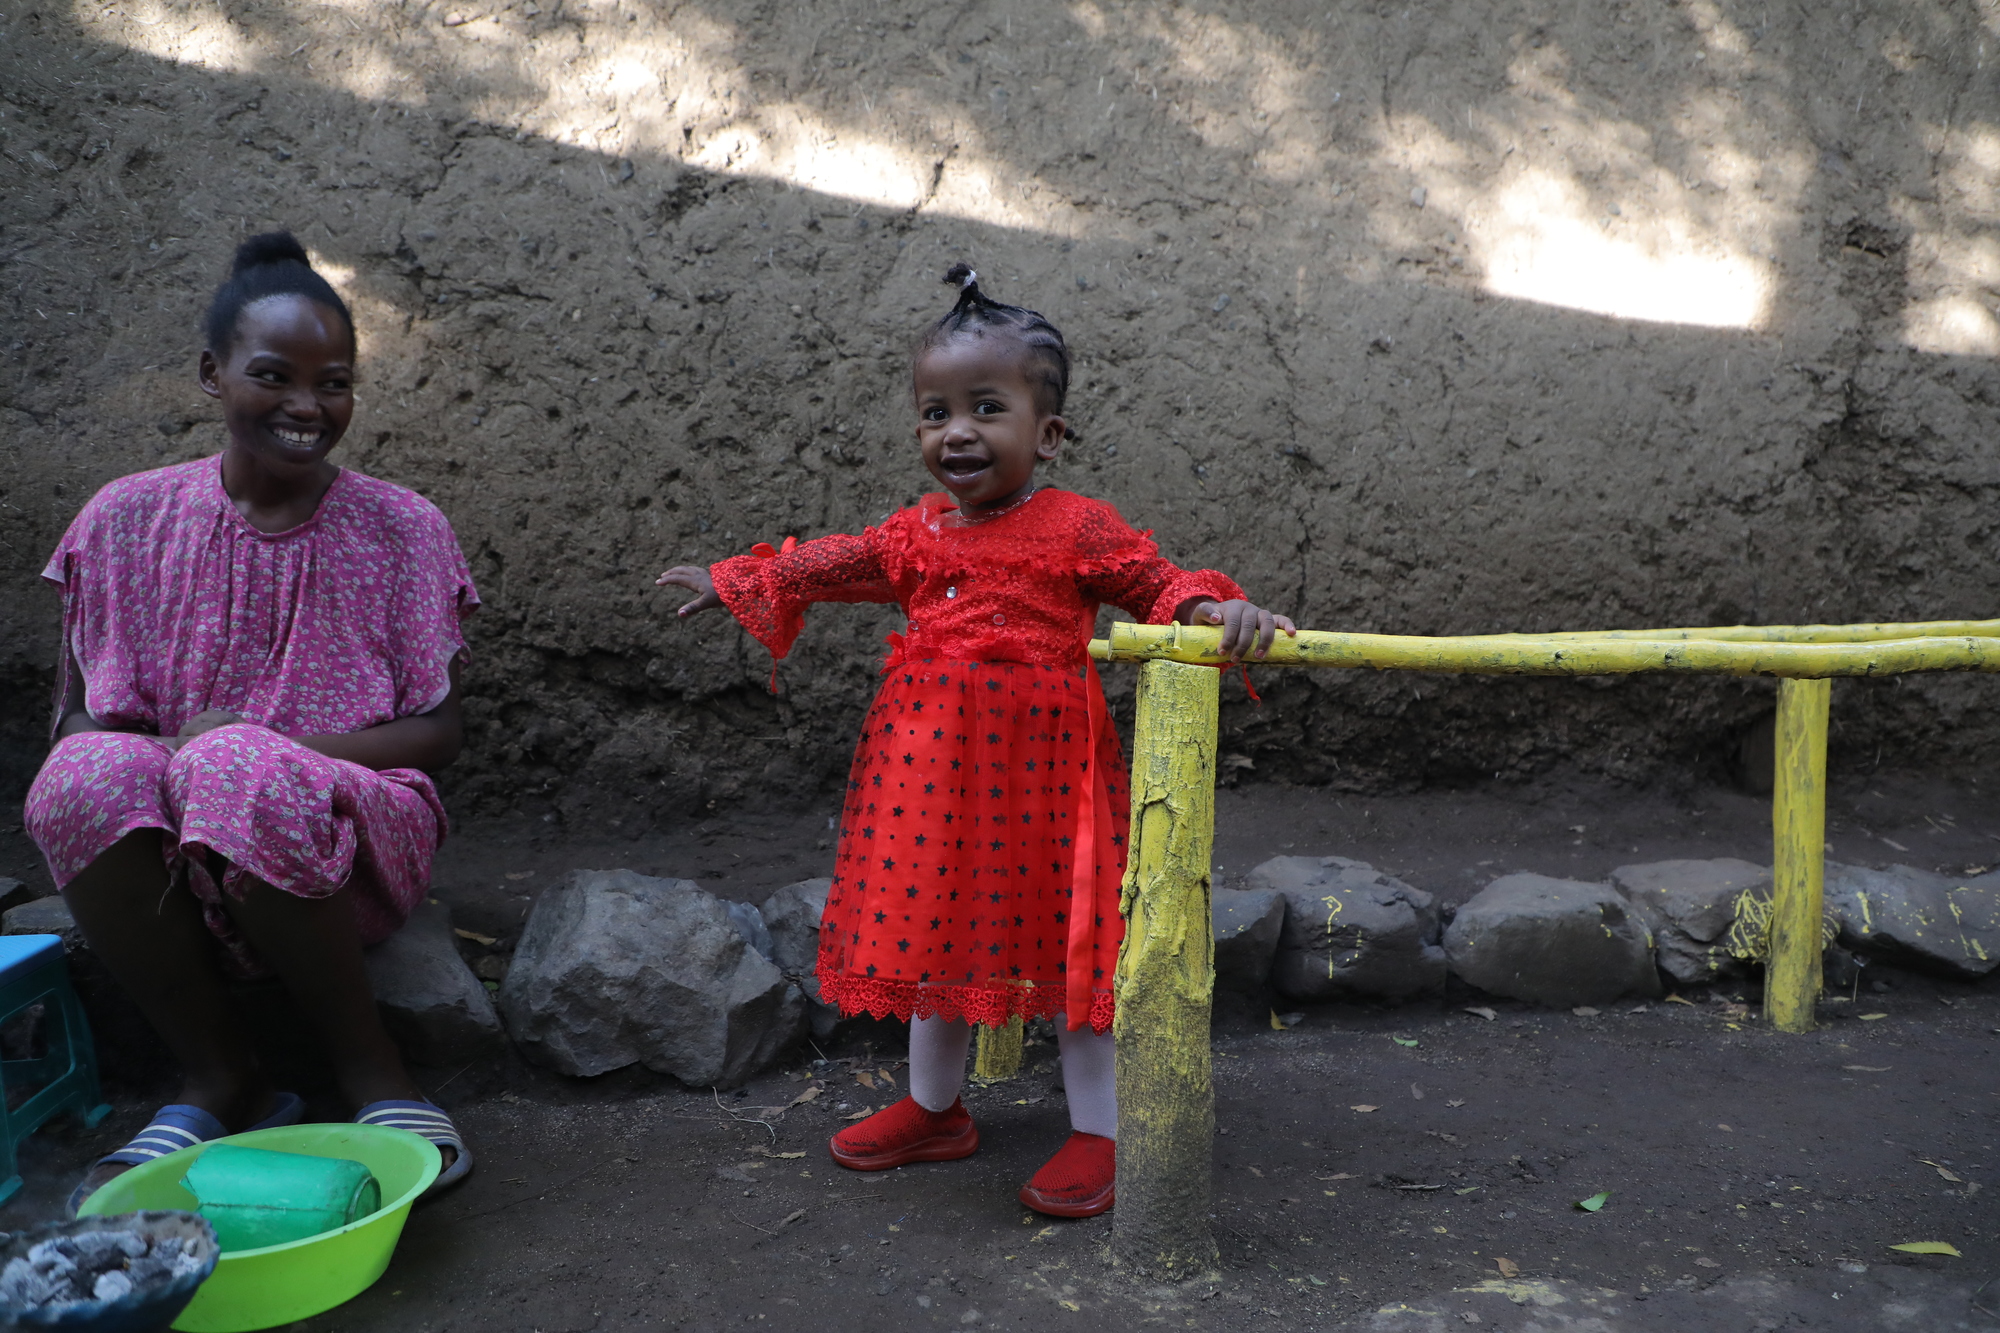 A small girl in a red dress stands smiling next to walking bars and smiles into the camera. Her mother sits next to her in a violet dress and smiles at her daughter.